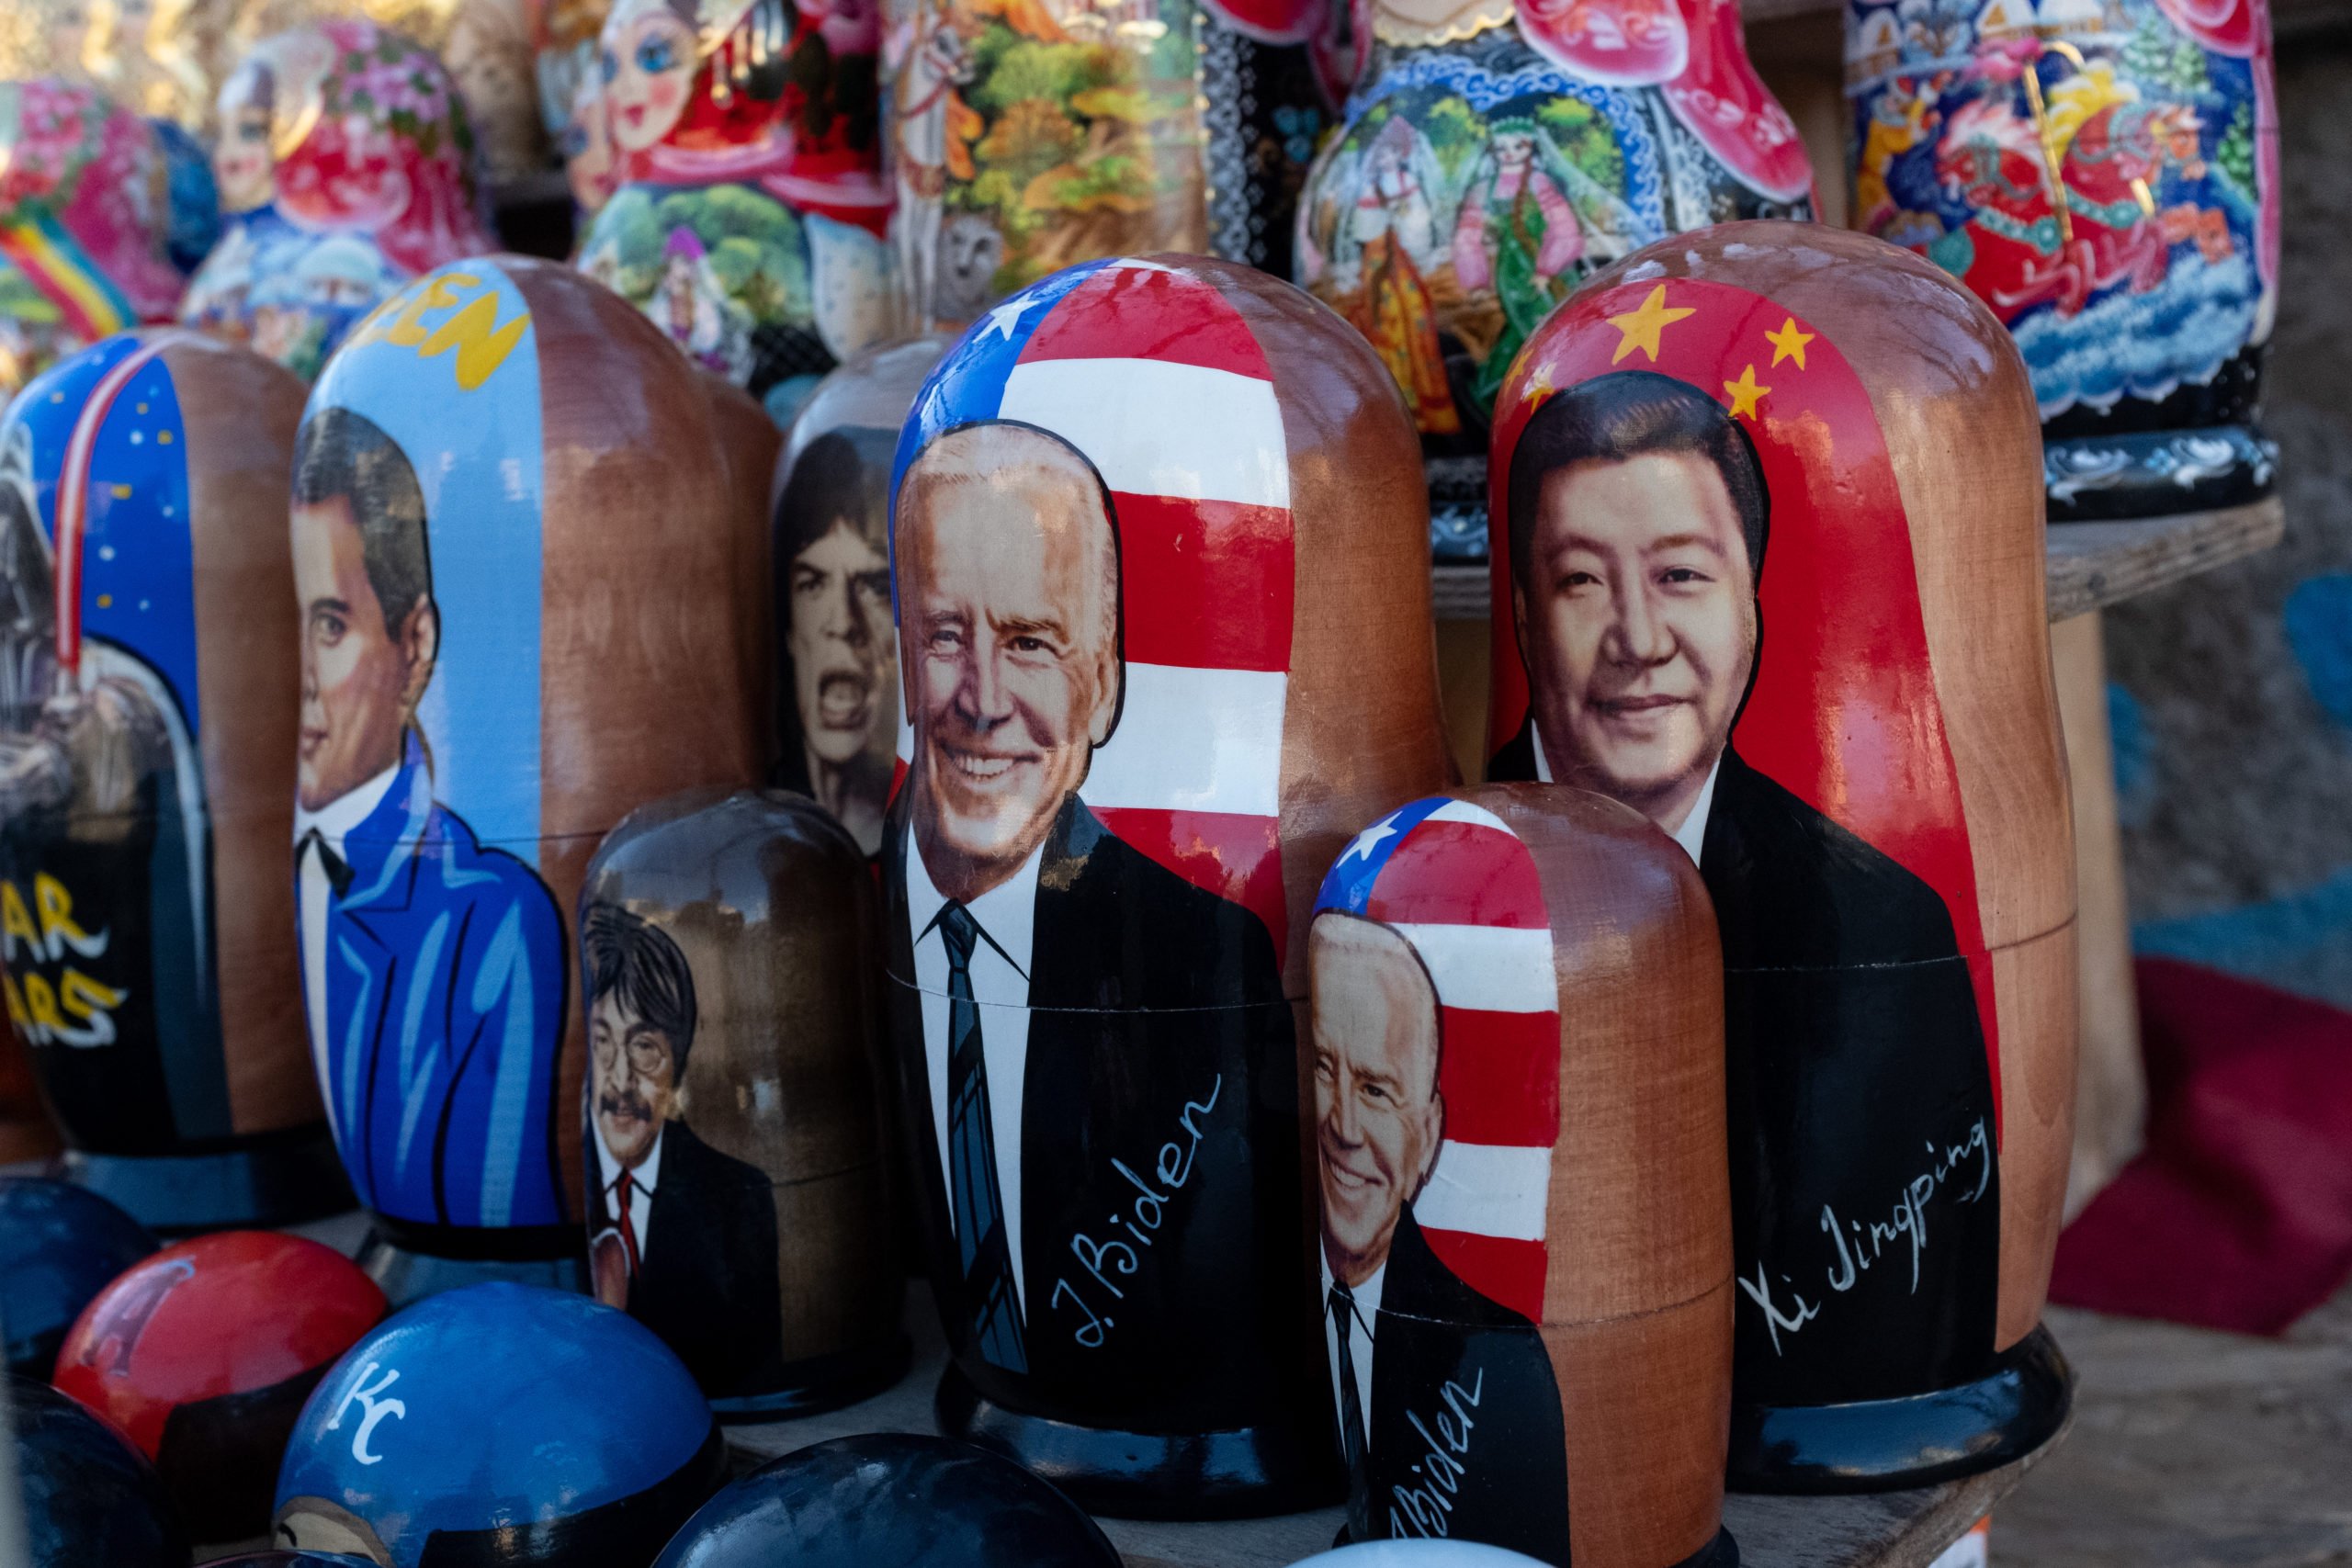 Russian nesting dolls of U.S President Joe Biden and Chinese leader Xi Jinping are seen at a souvenir stand on February 04, 2022 in Kyiv, Ukraine. International fears of an imminent Russian military invasion of Ukraine continue to remain high as Russian troops mass along the Russian-Ukrainian border and weeks of diplomatic talks continue to stall. (Photo by Chris McGrath/Getty Images)